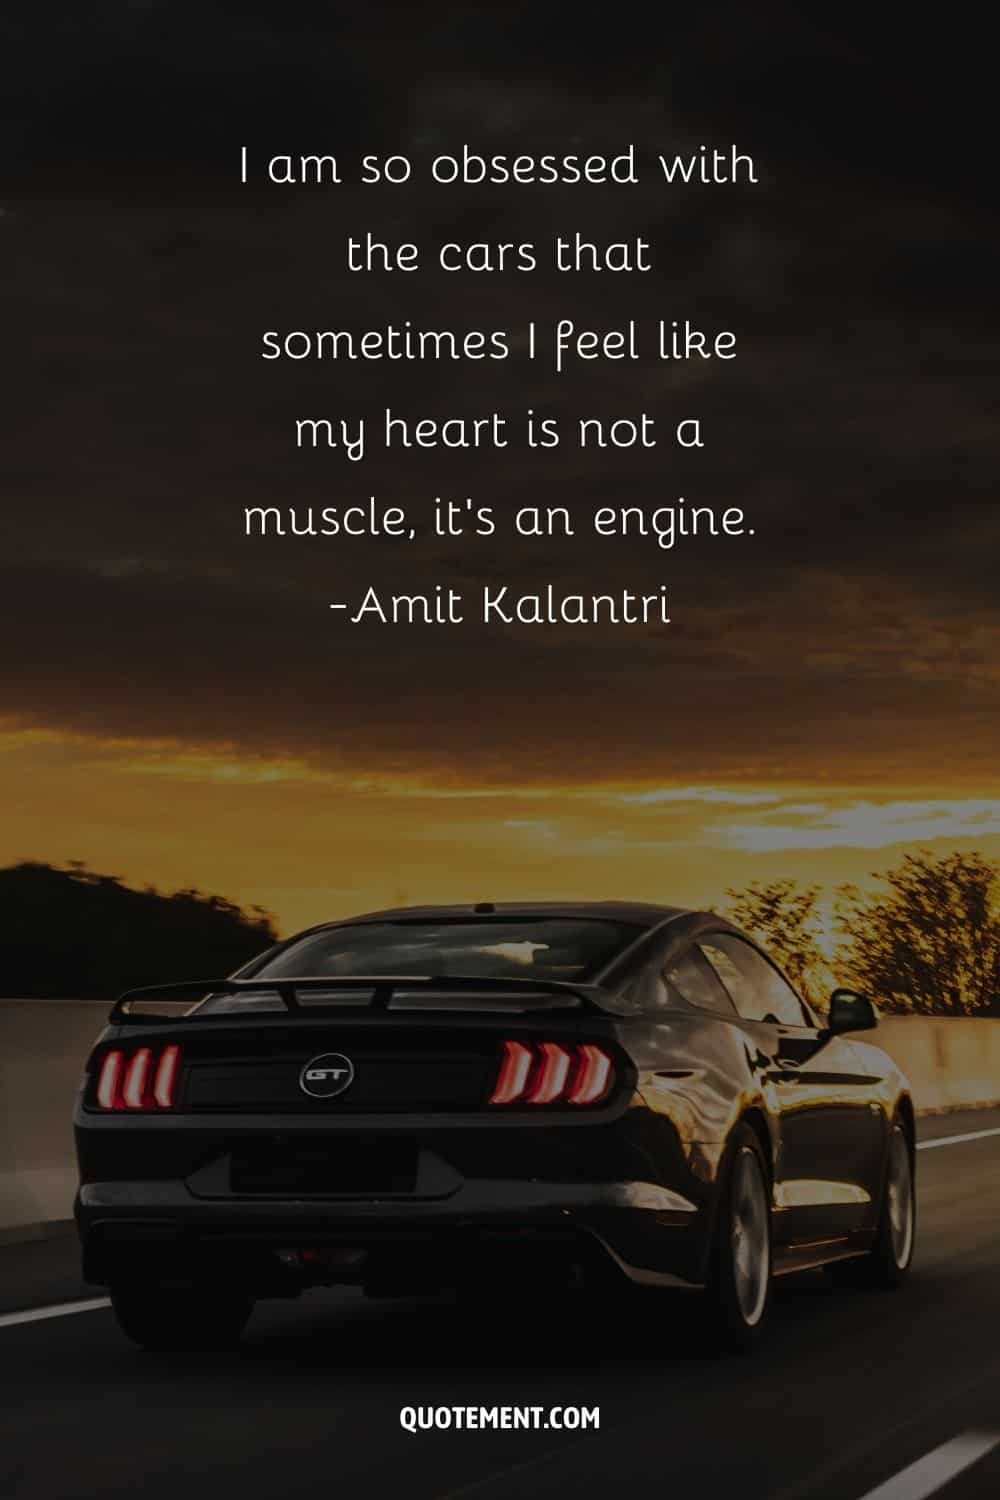 “I am so obsessed with the cars that sometimes I feel like my heart is not a muscle, it's an engine.” ― Amit Kalantri, Wealth of Words